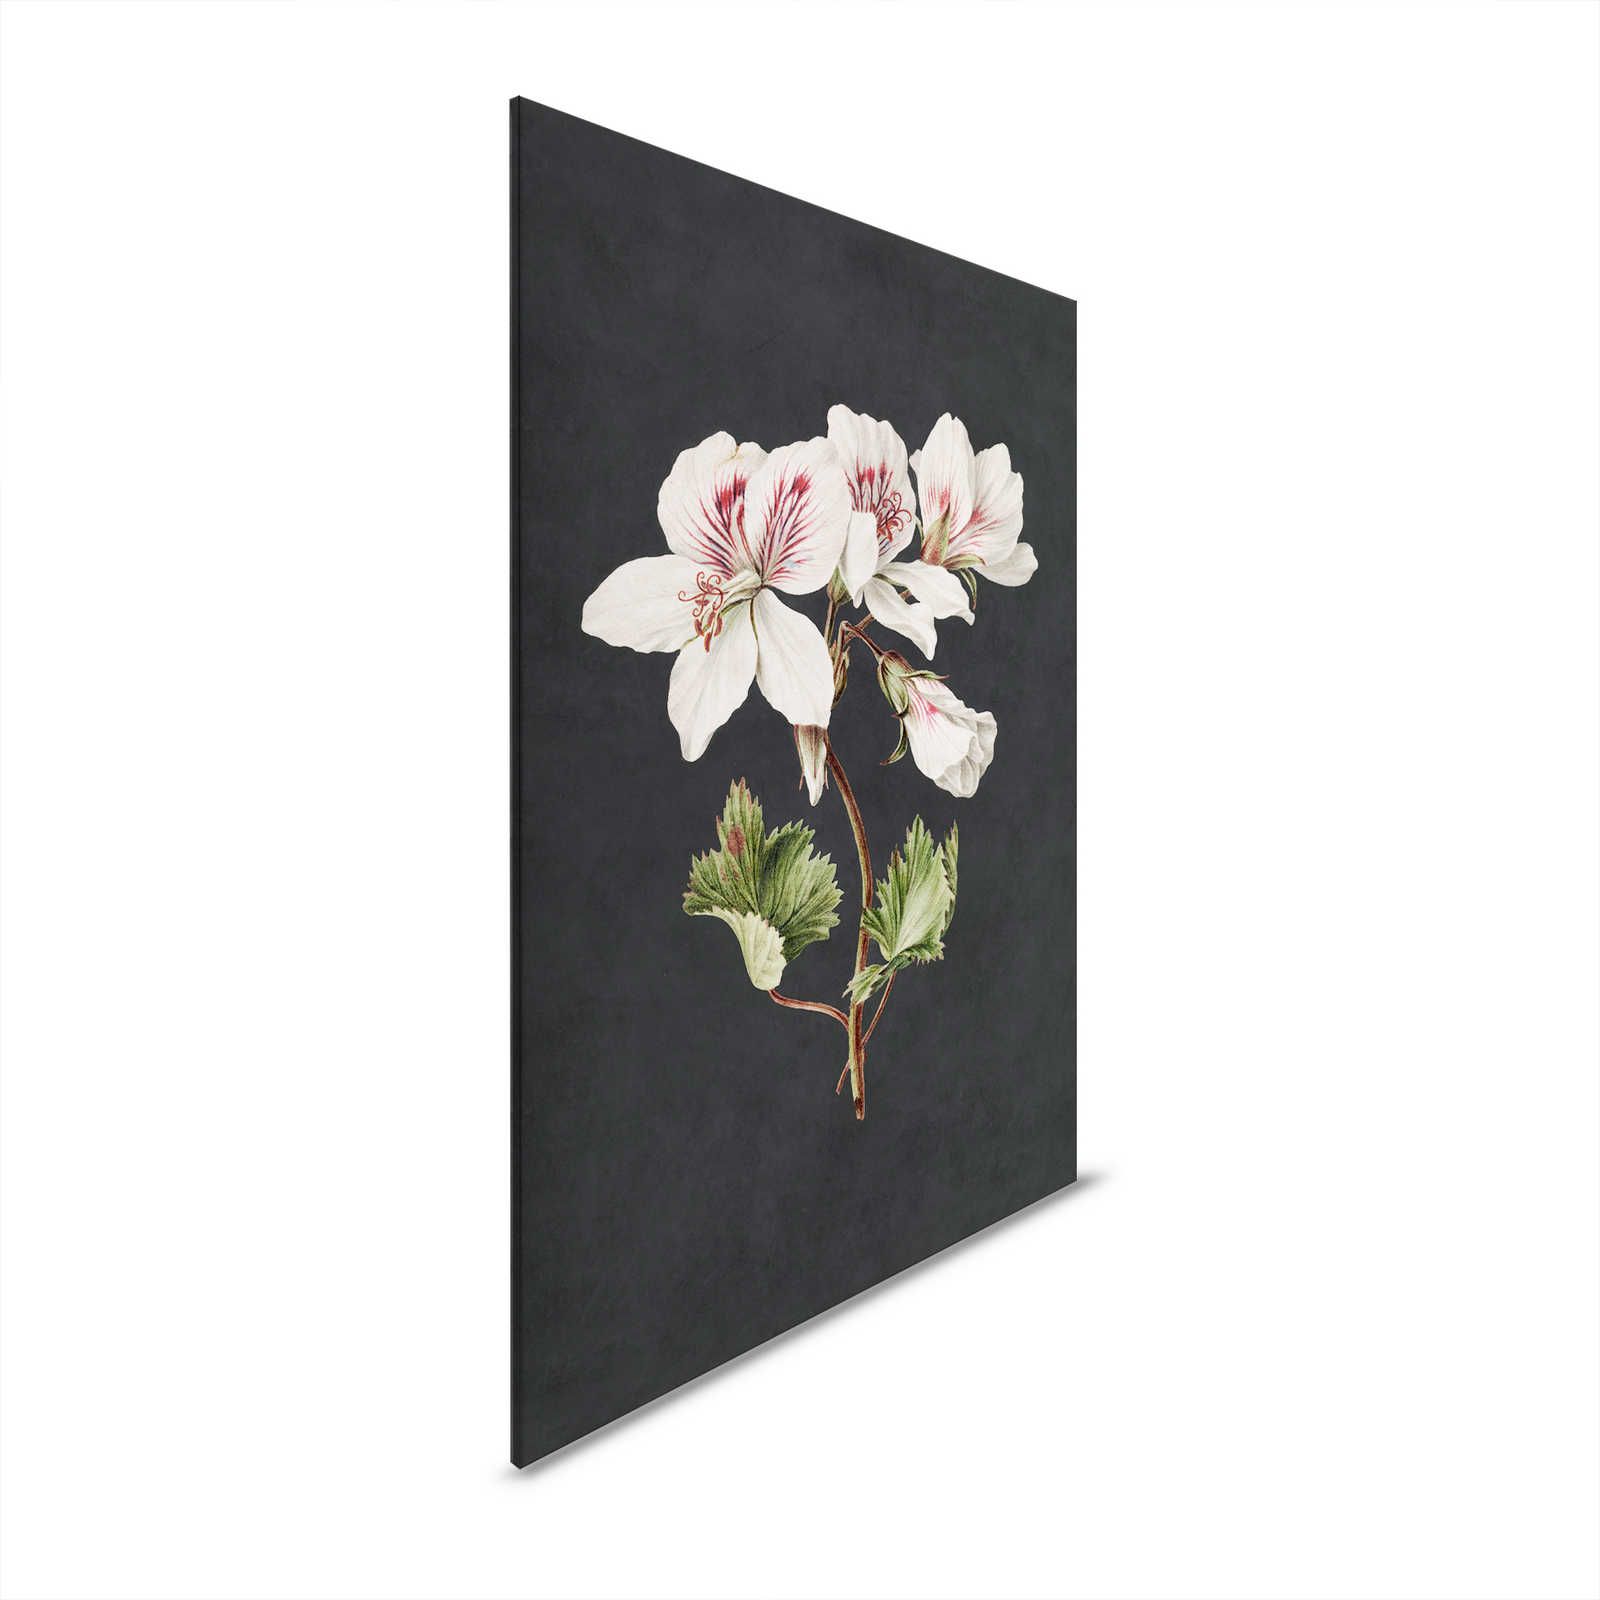 Midnight Garden 1 - Black Canvas Painting Lily Blossom Painting Style - 0.80 m x 1.20 m
